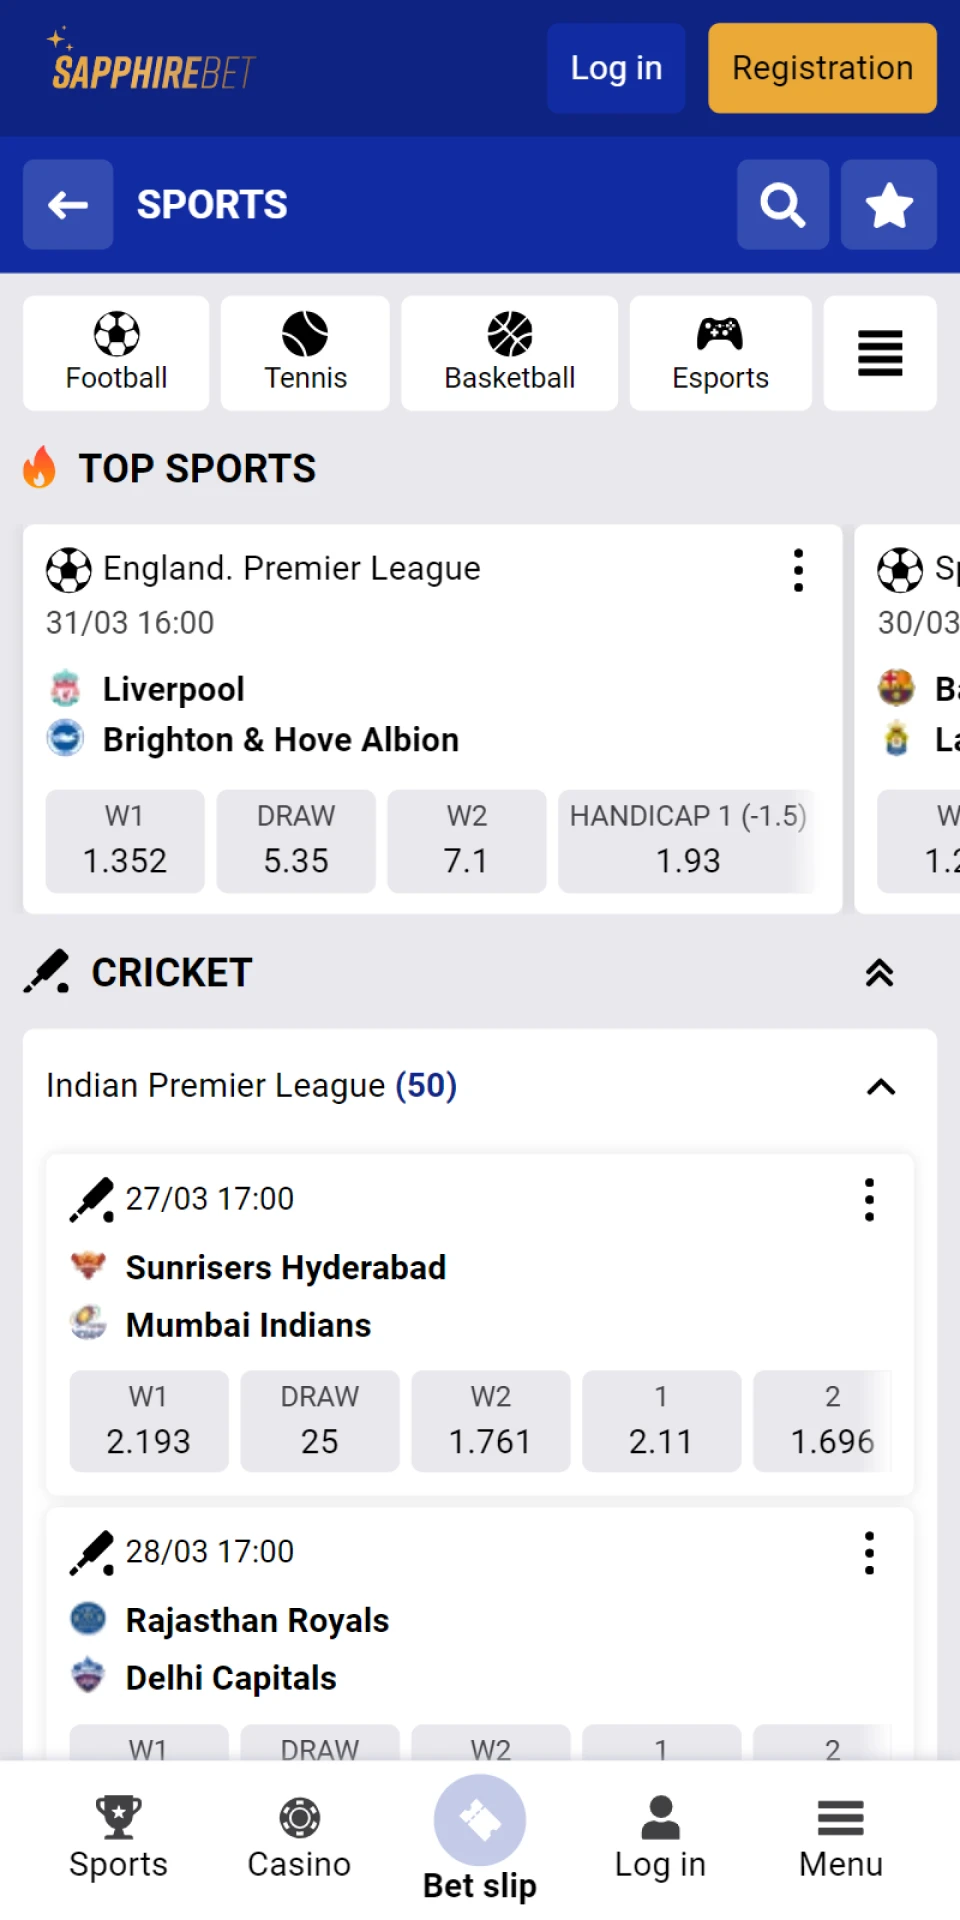 The Sapphirebet app has a large sports section.